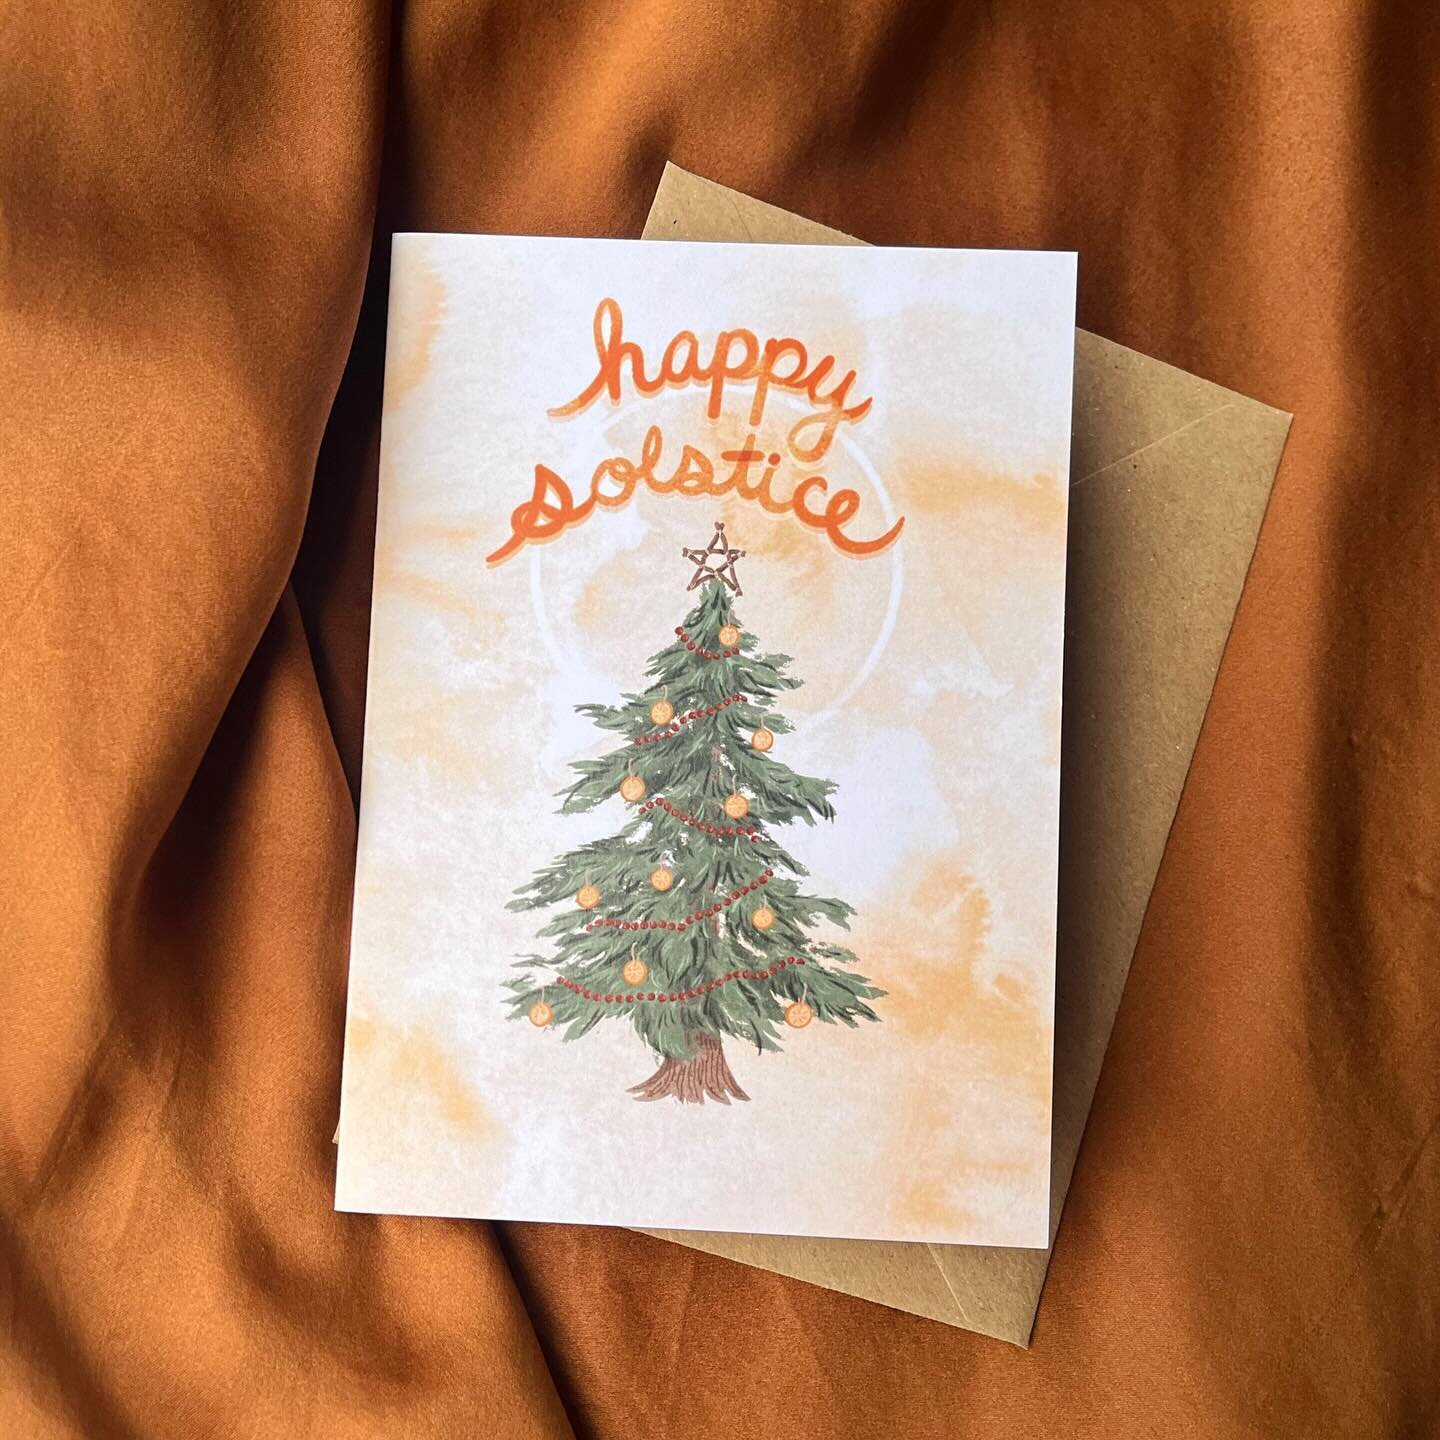 The light will soon return! 🌞 solstice blessings everyone 🌲✨ #wintersolstice #yuletide #holidaycards